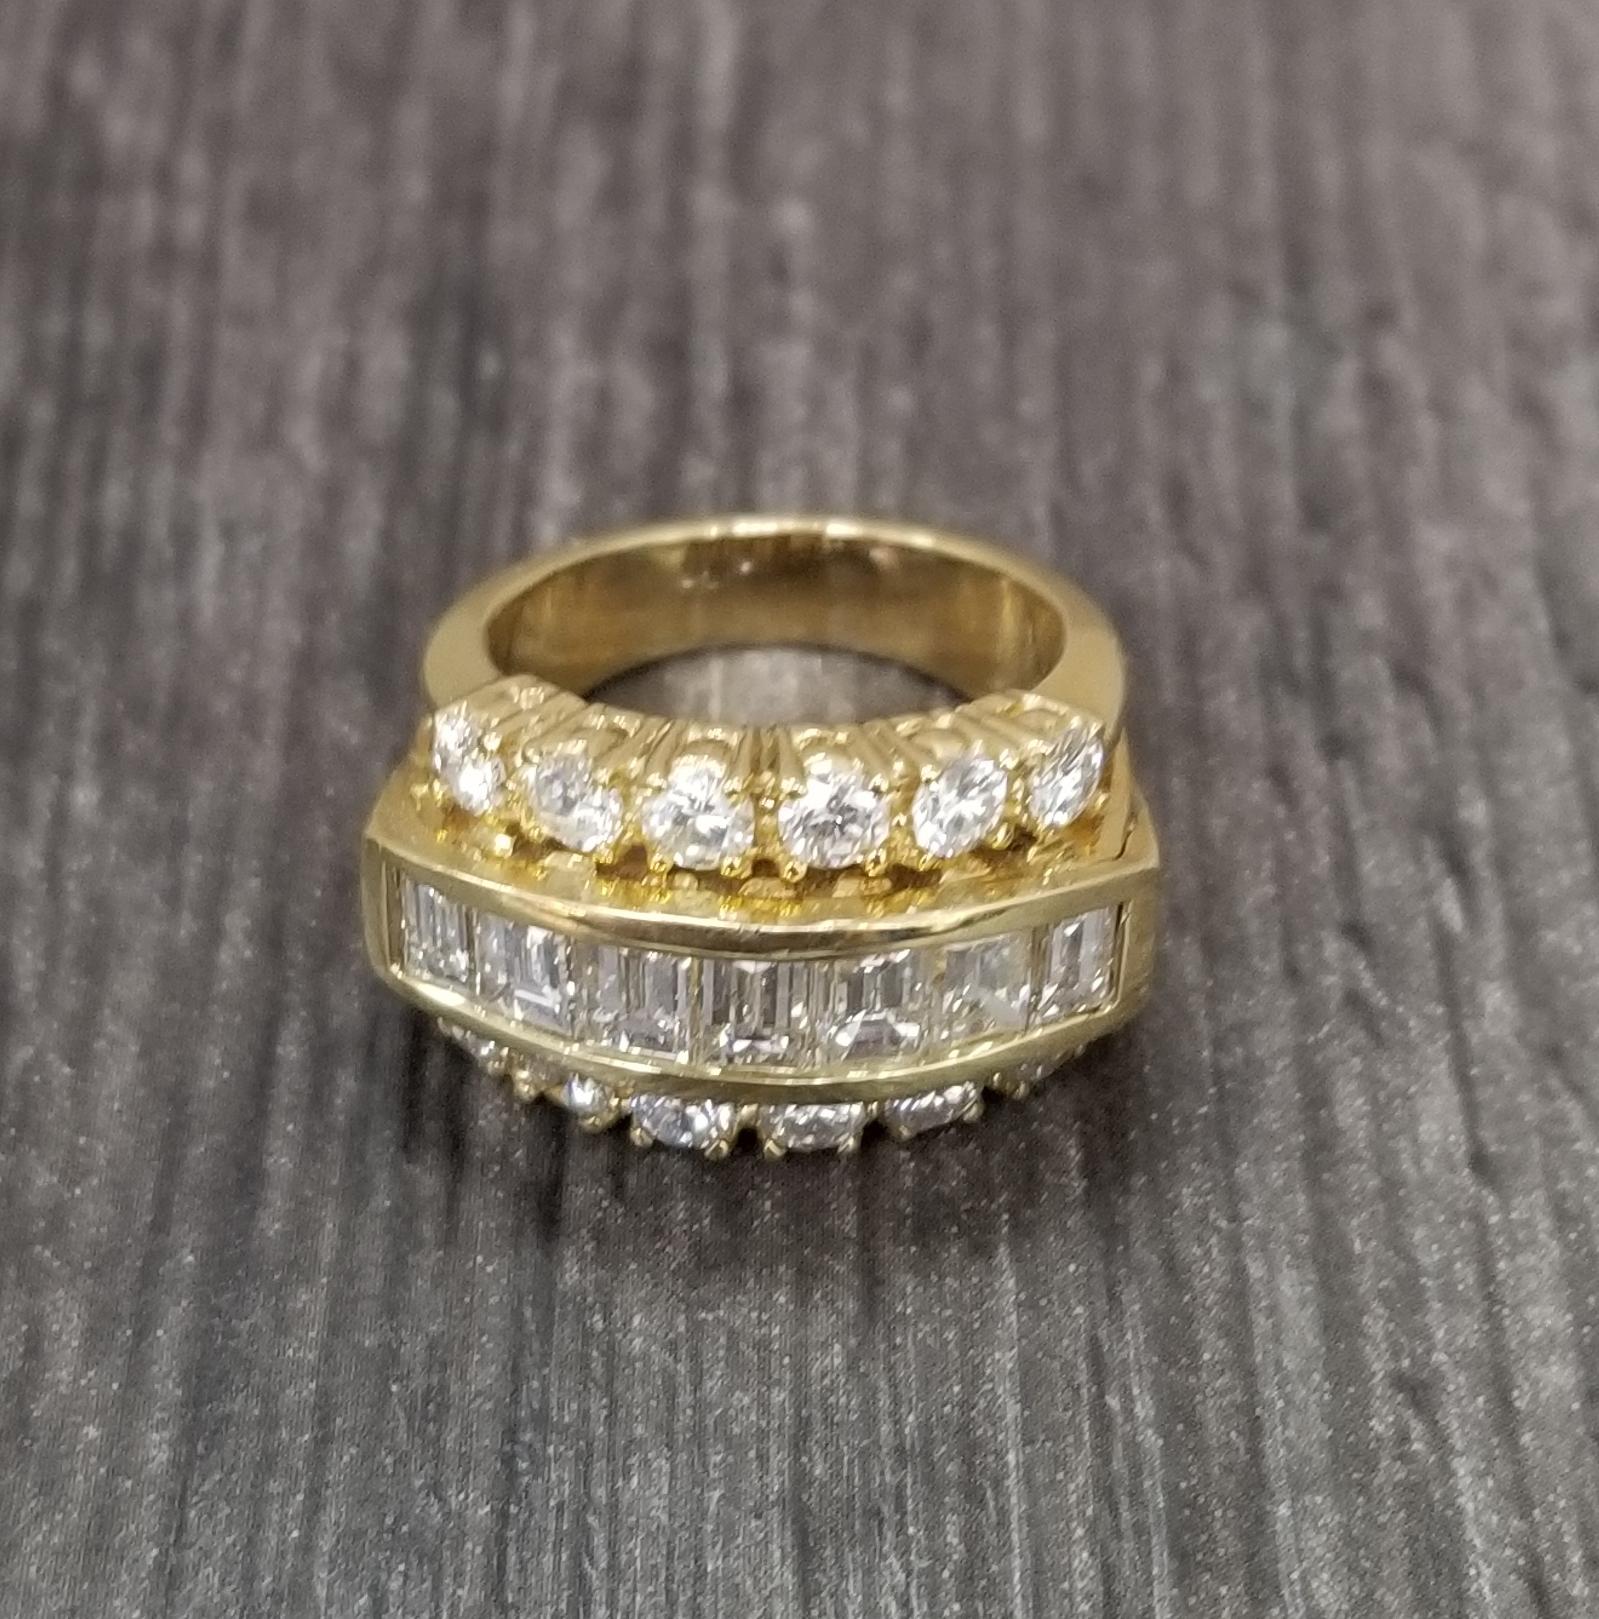 14k yellow gold 3 row diamond wedding ring, containing 7 baguette cut diamond weighing 1.00cts. and 12 round full cut diamonds weighing 1.50cts.; color 